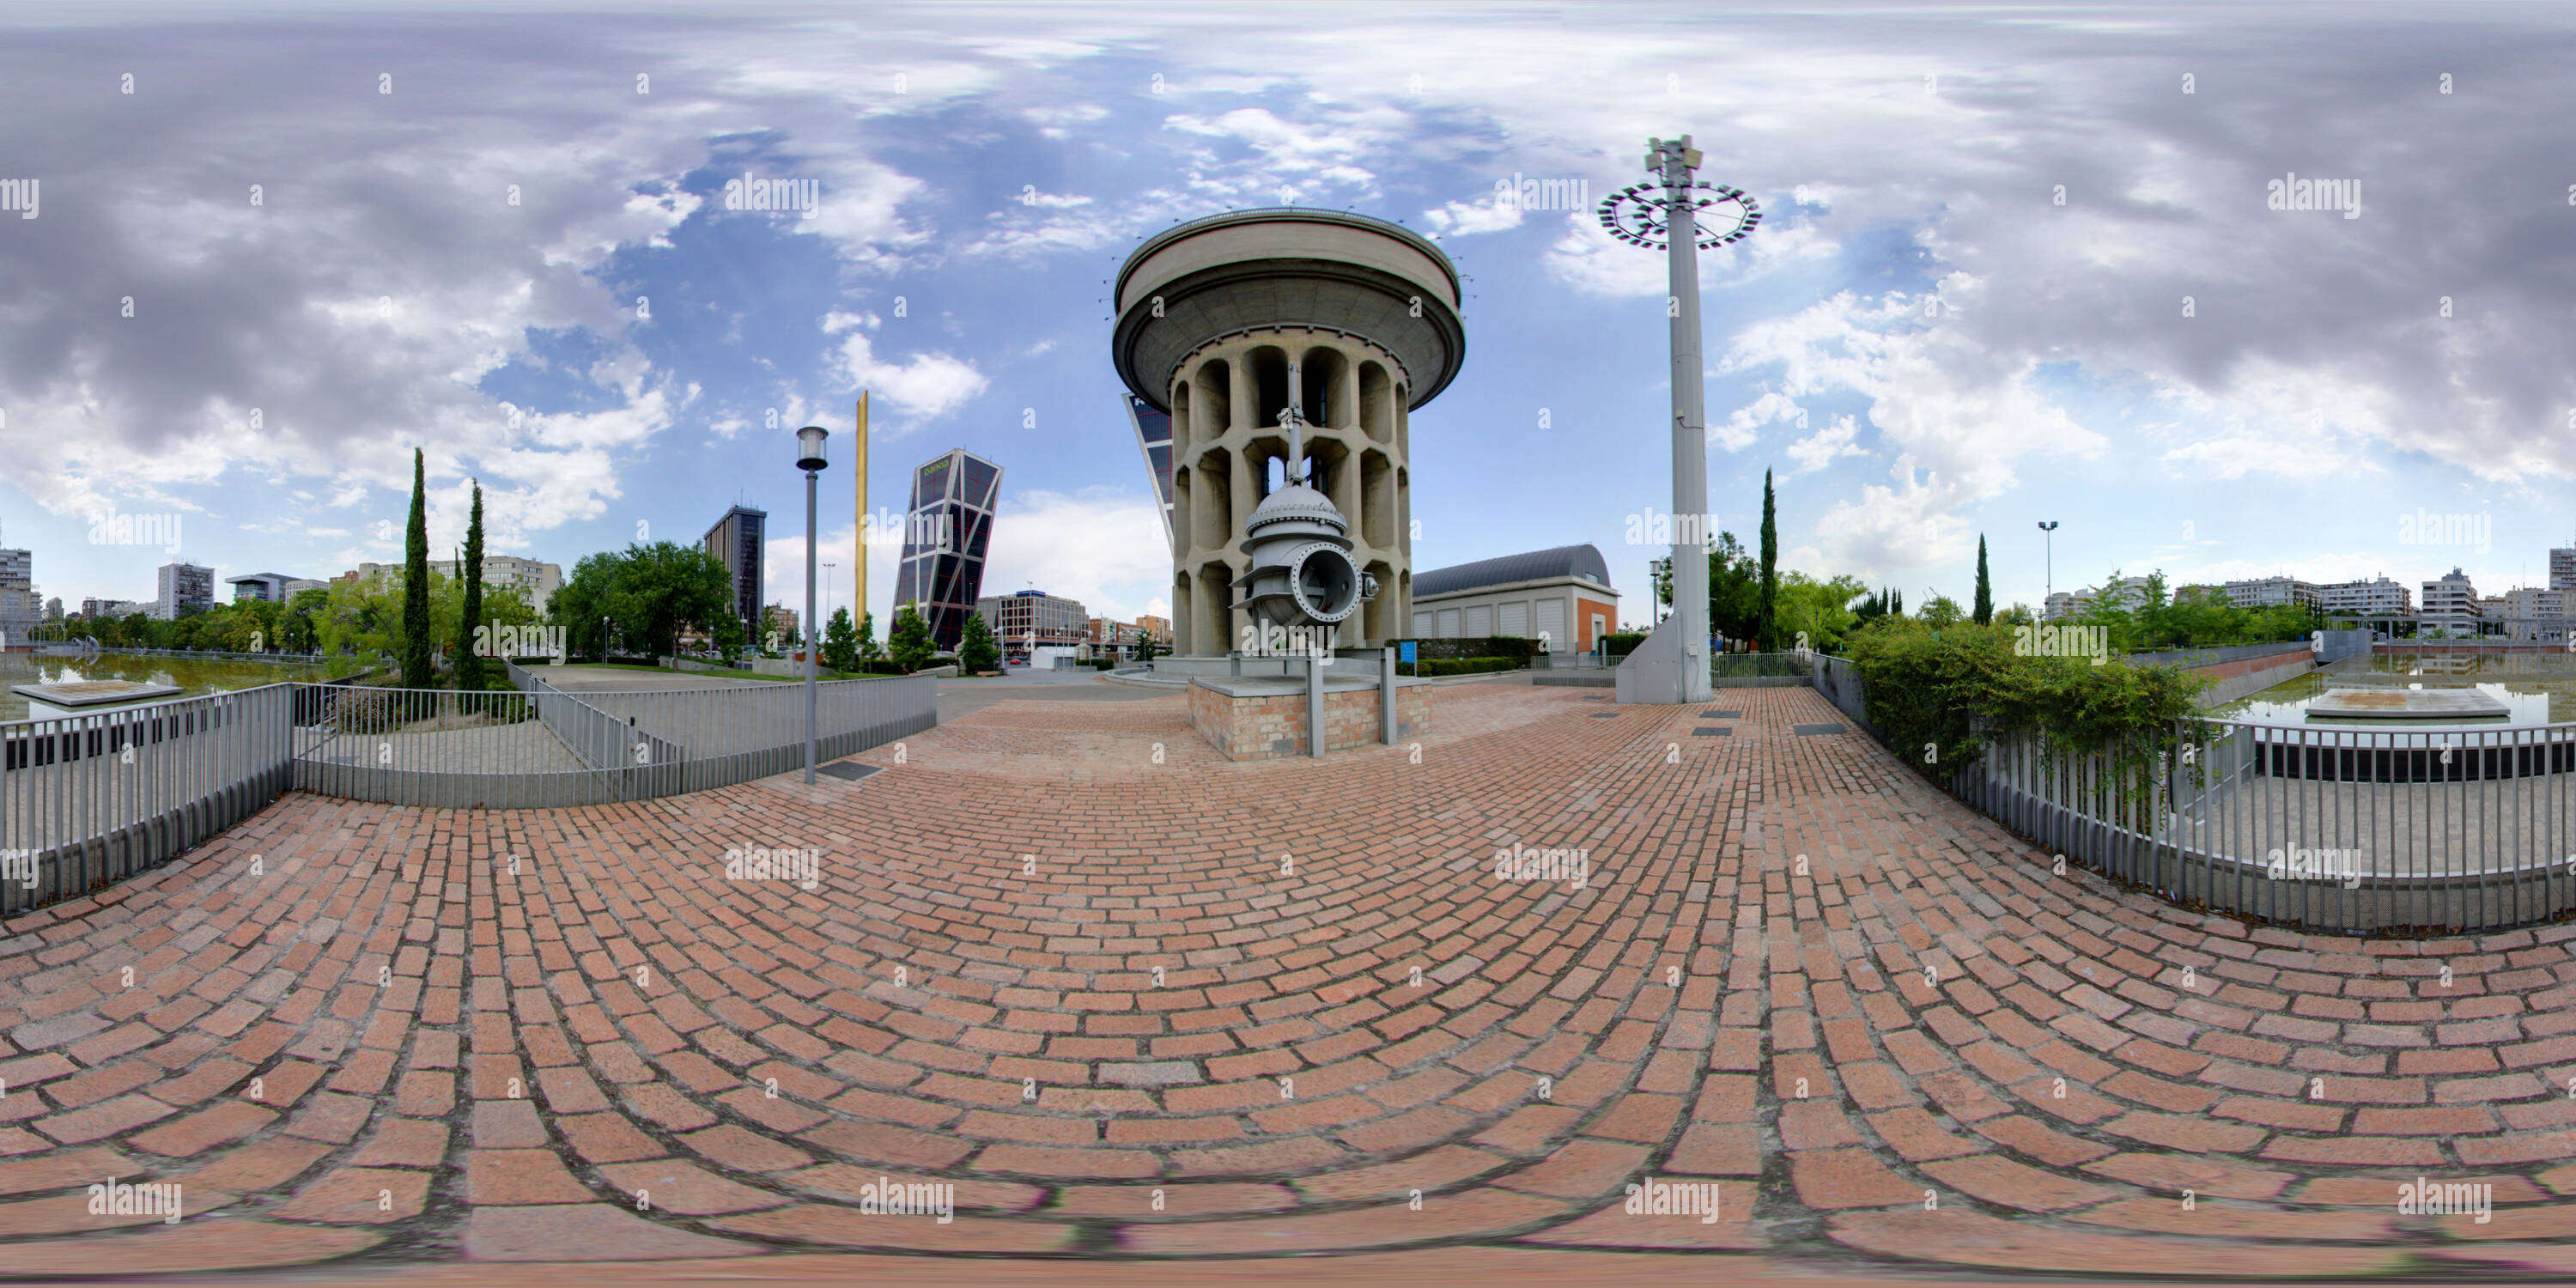 360 degree panoramic view of Water Tower of Canal de Isabel I and Fundación CanalI in Plaza Castilla, Madrid